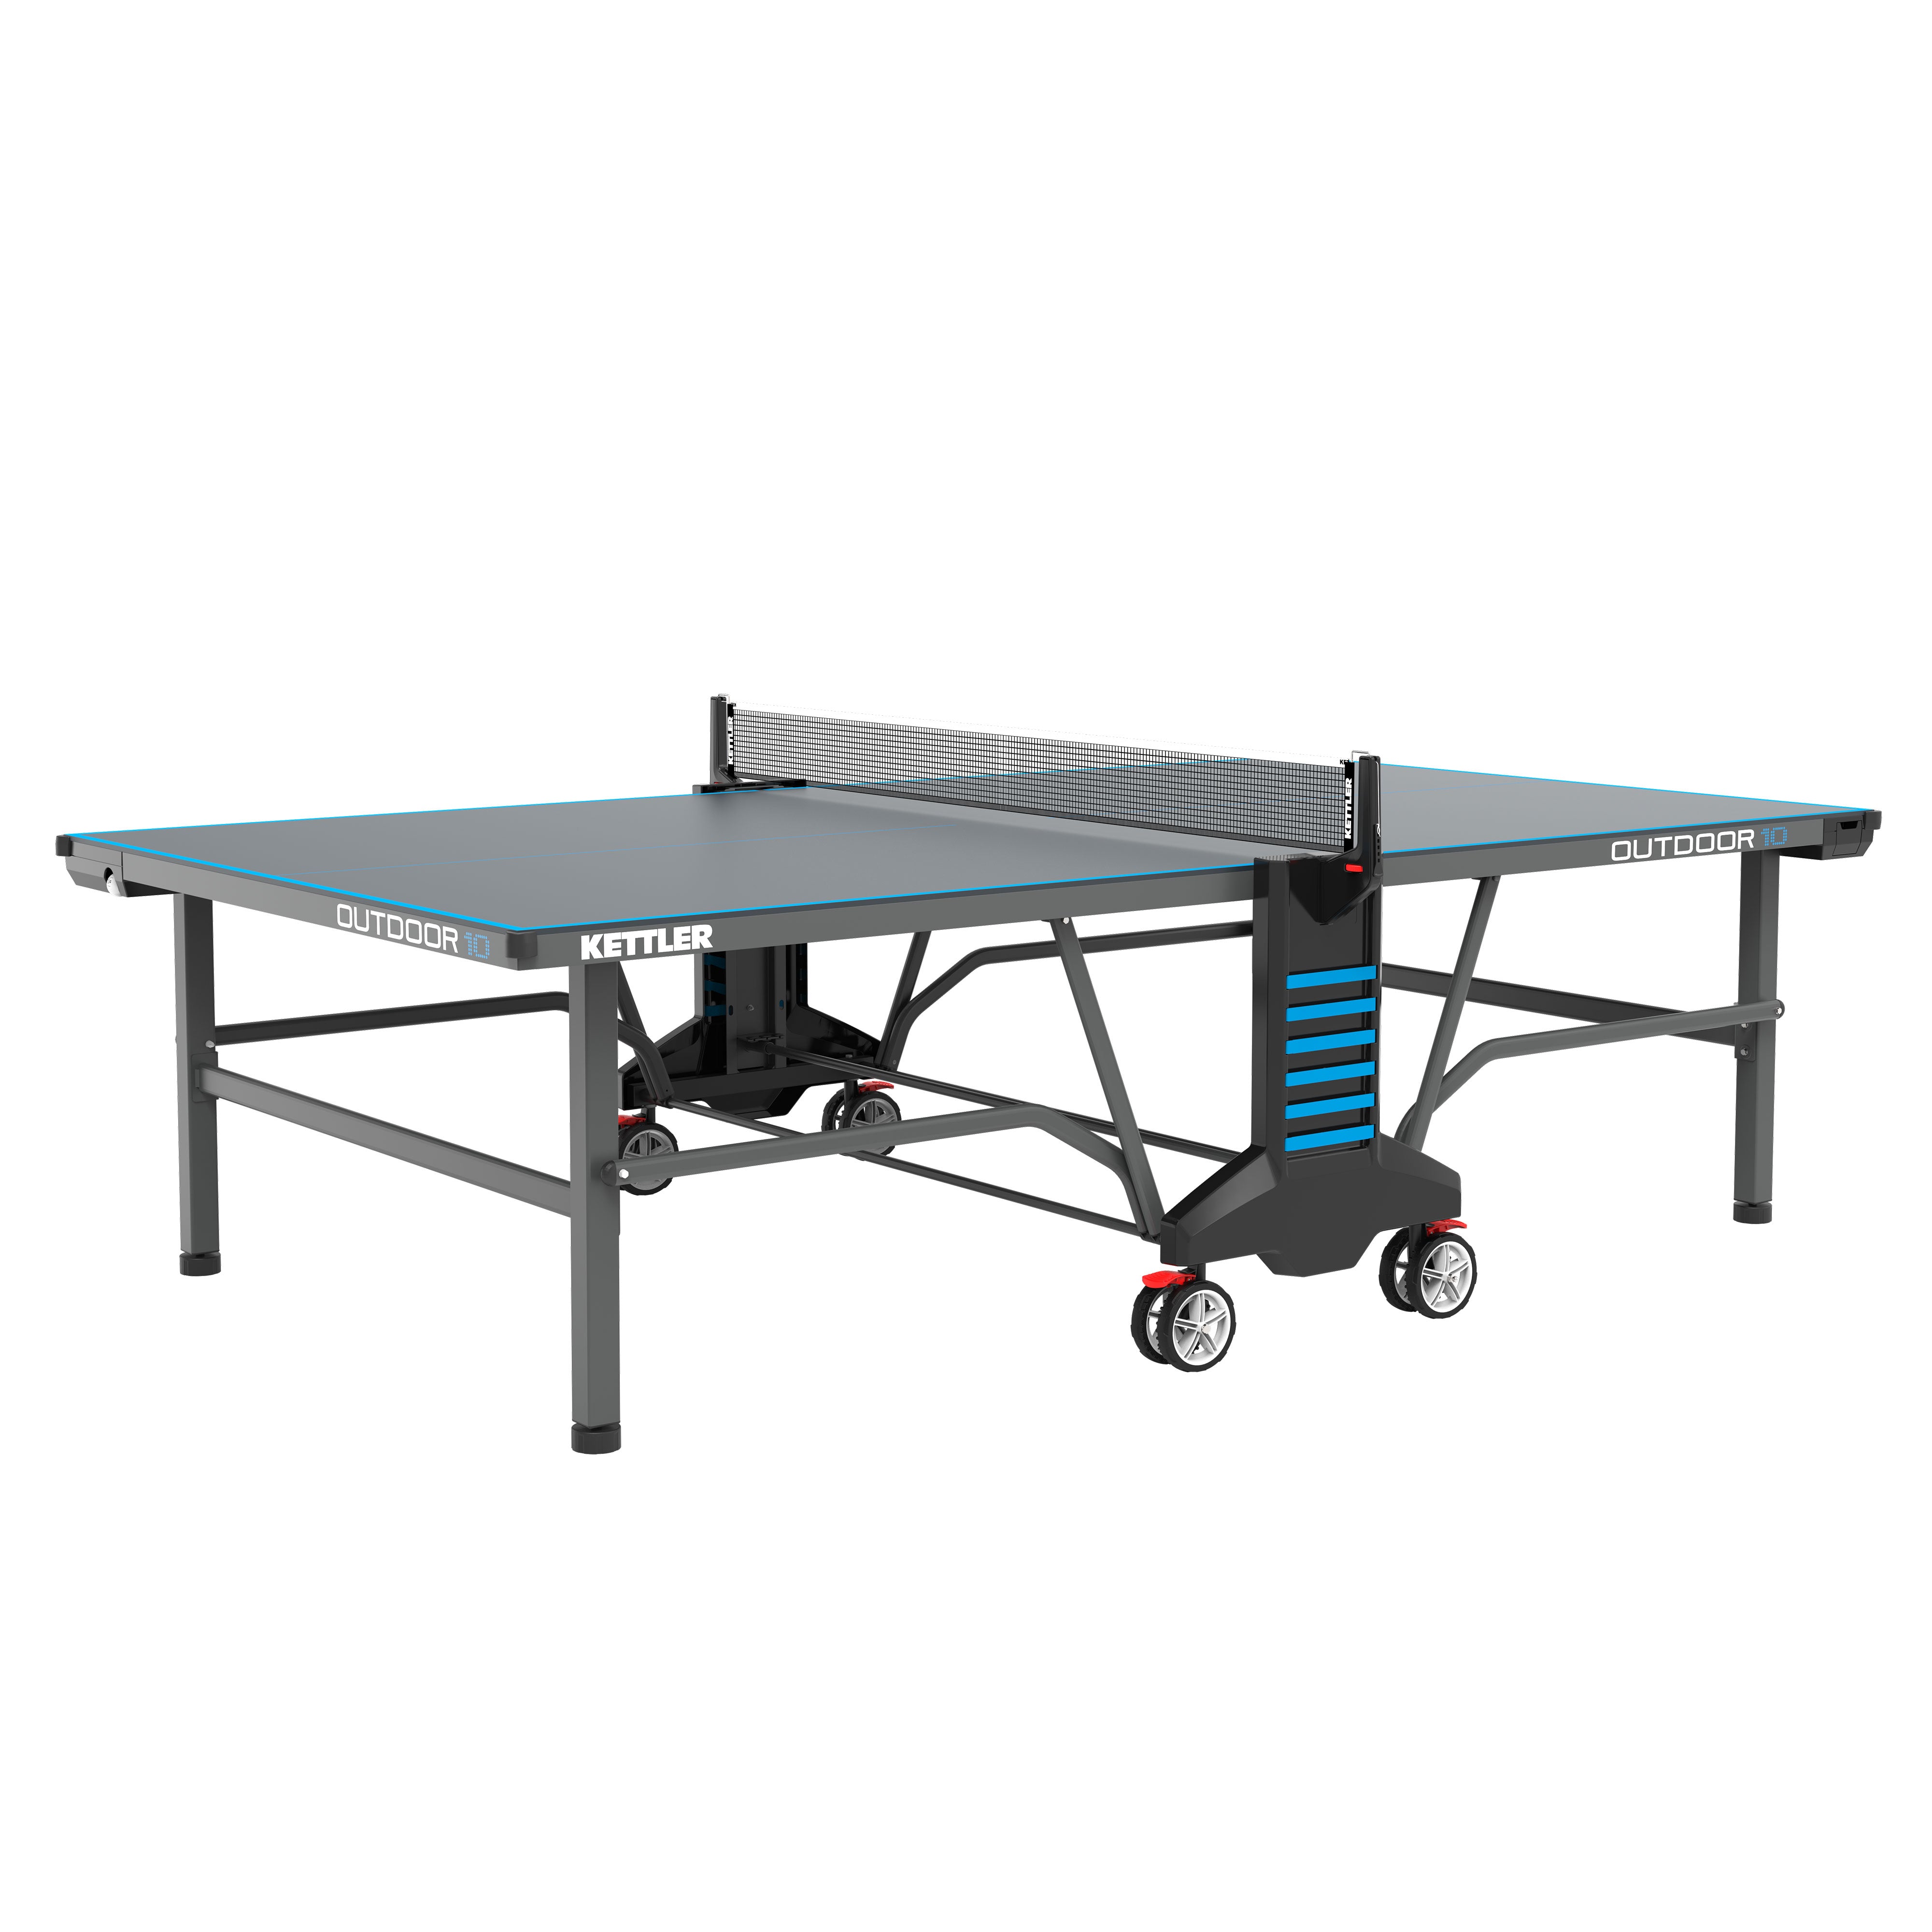 Outdoor 10 Table Tennis Table 4-Player Bundle